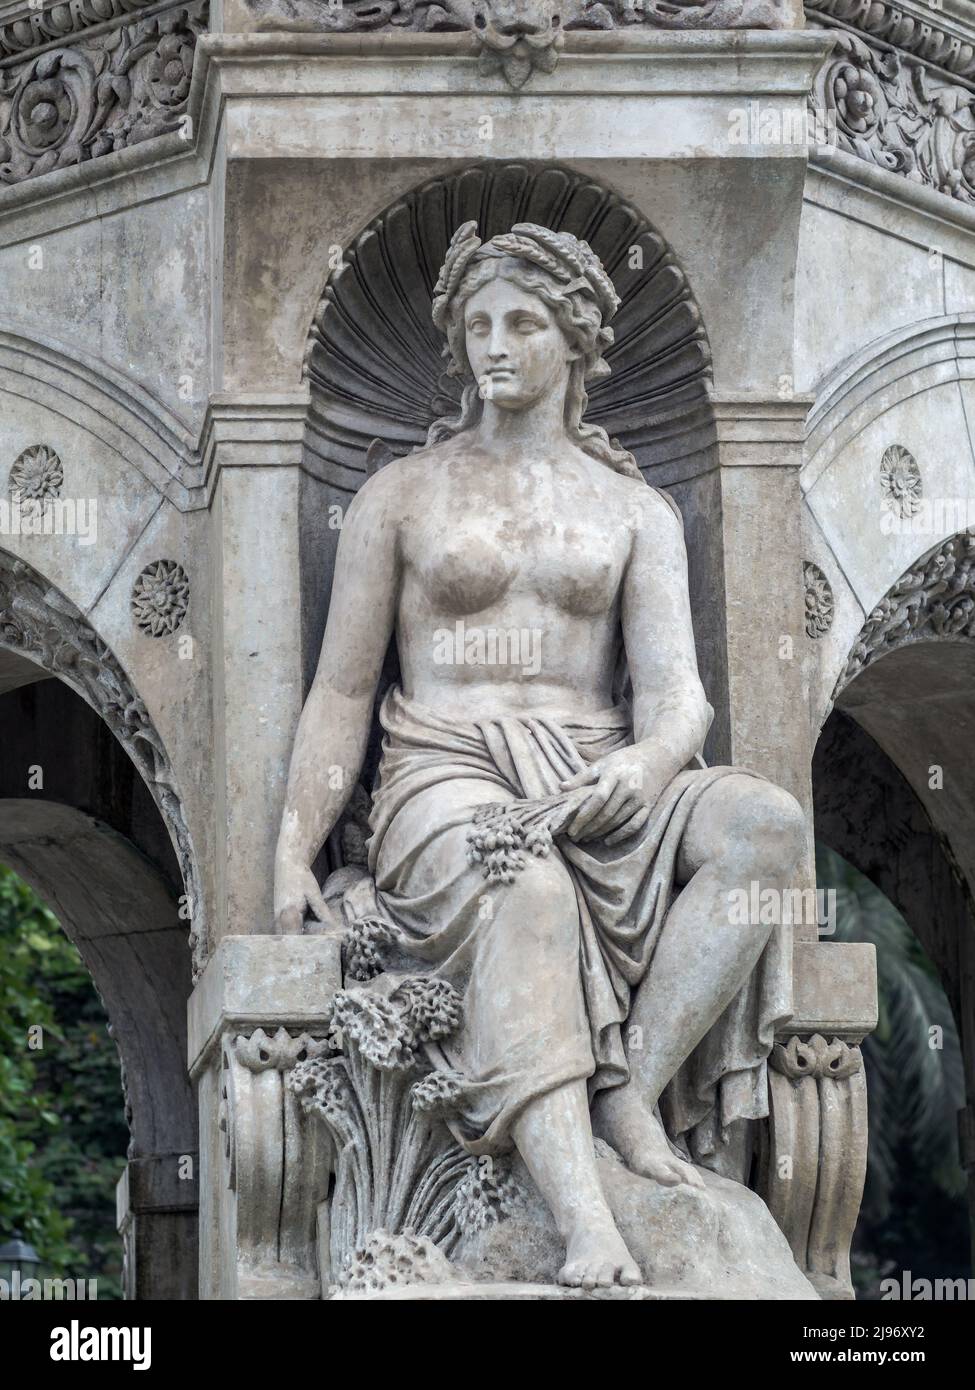 05 20 2022 Flora Fountain is an ornamentally and exquisitely sculpted architectural heritage monument, Flora Fountain,depicts the Roman goddess Flora. Stock Photo